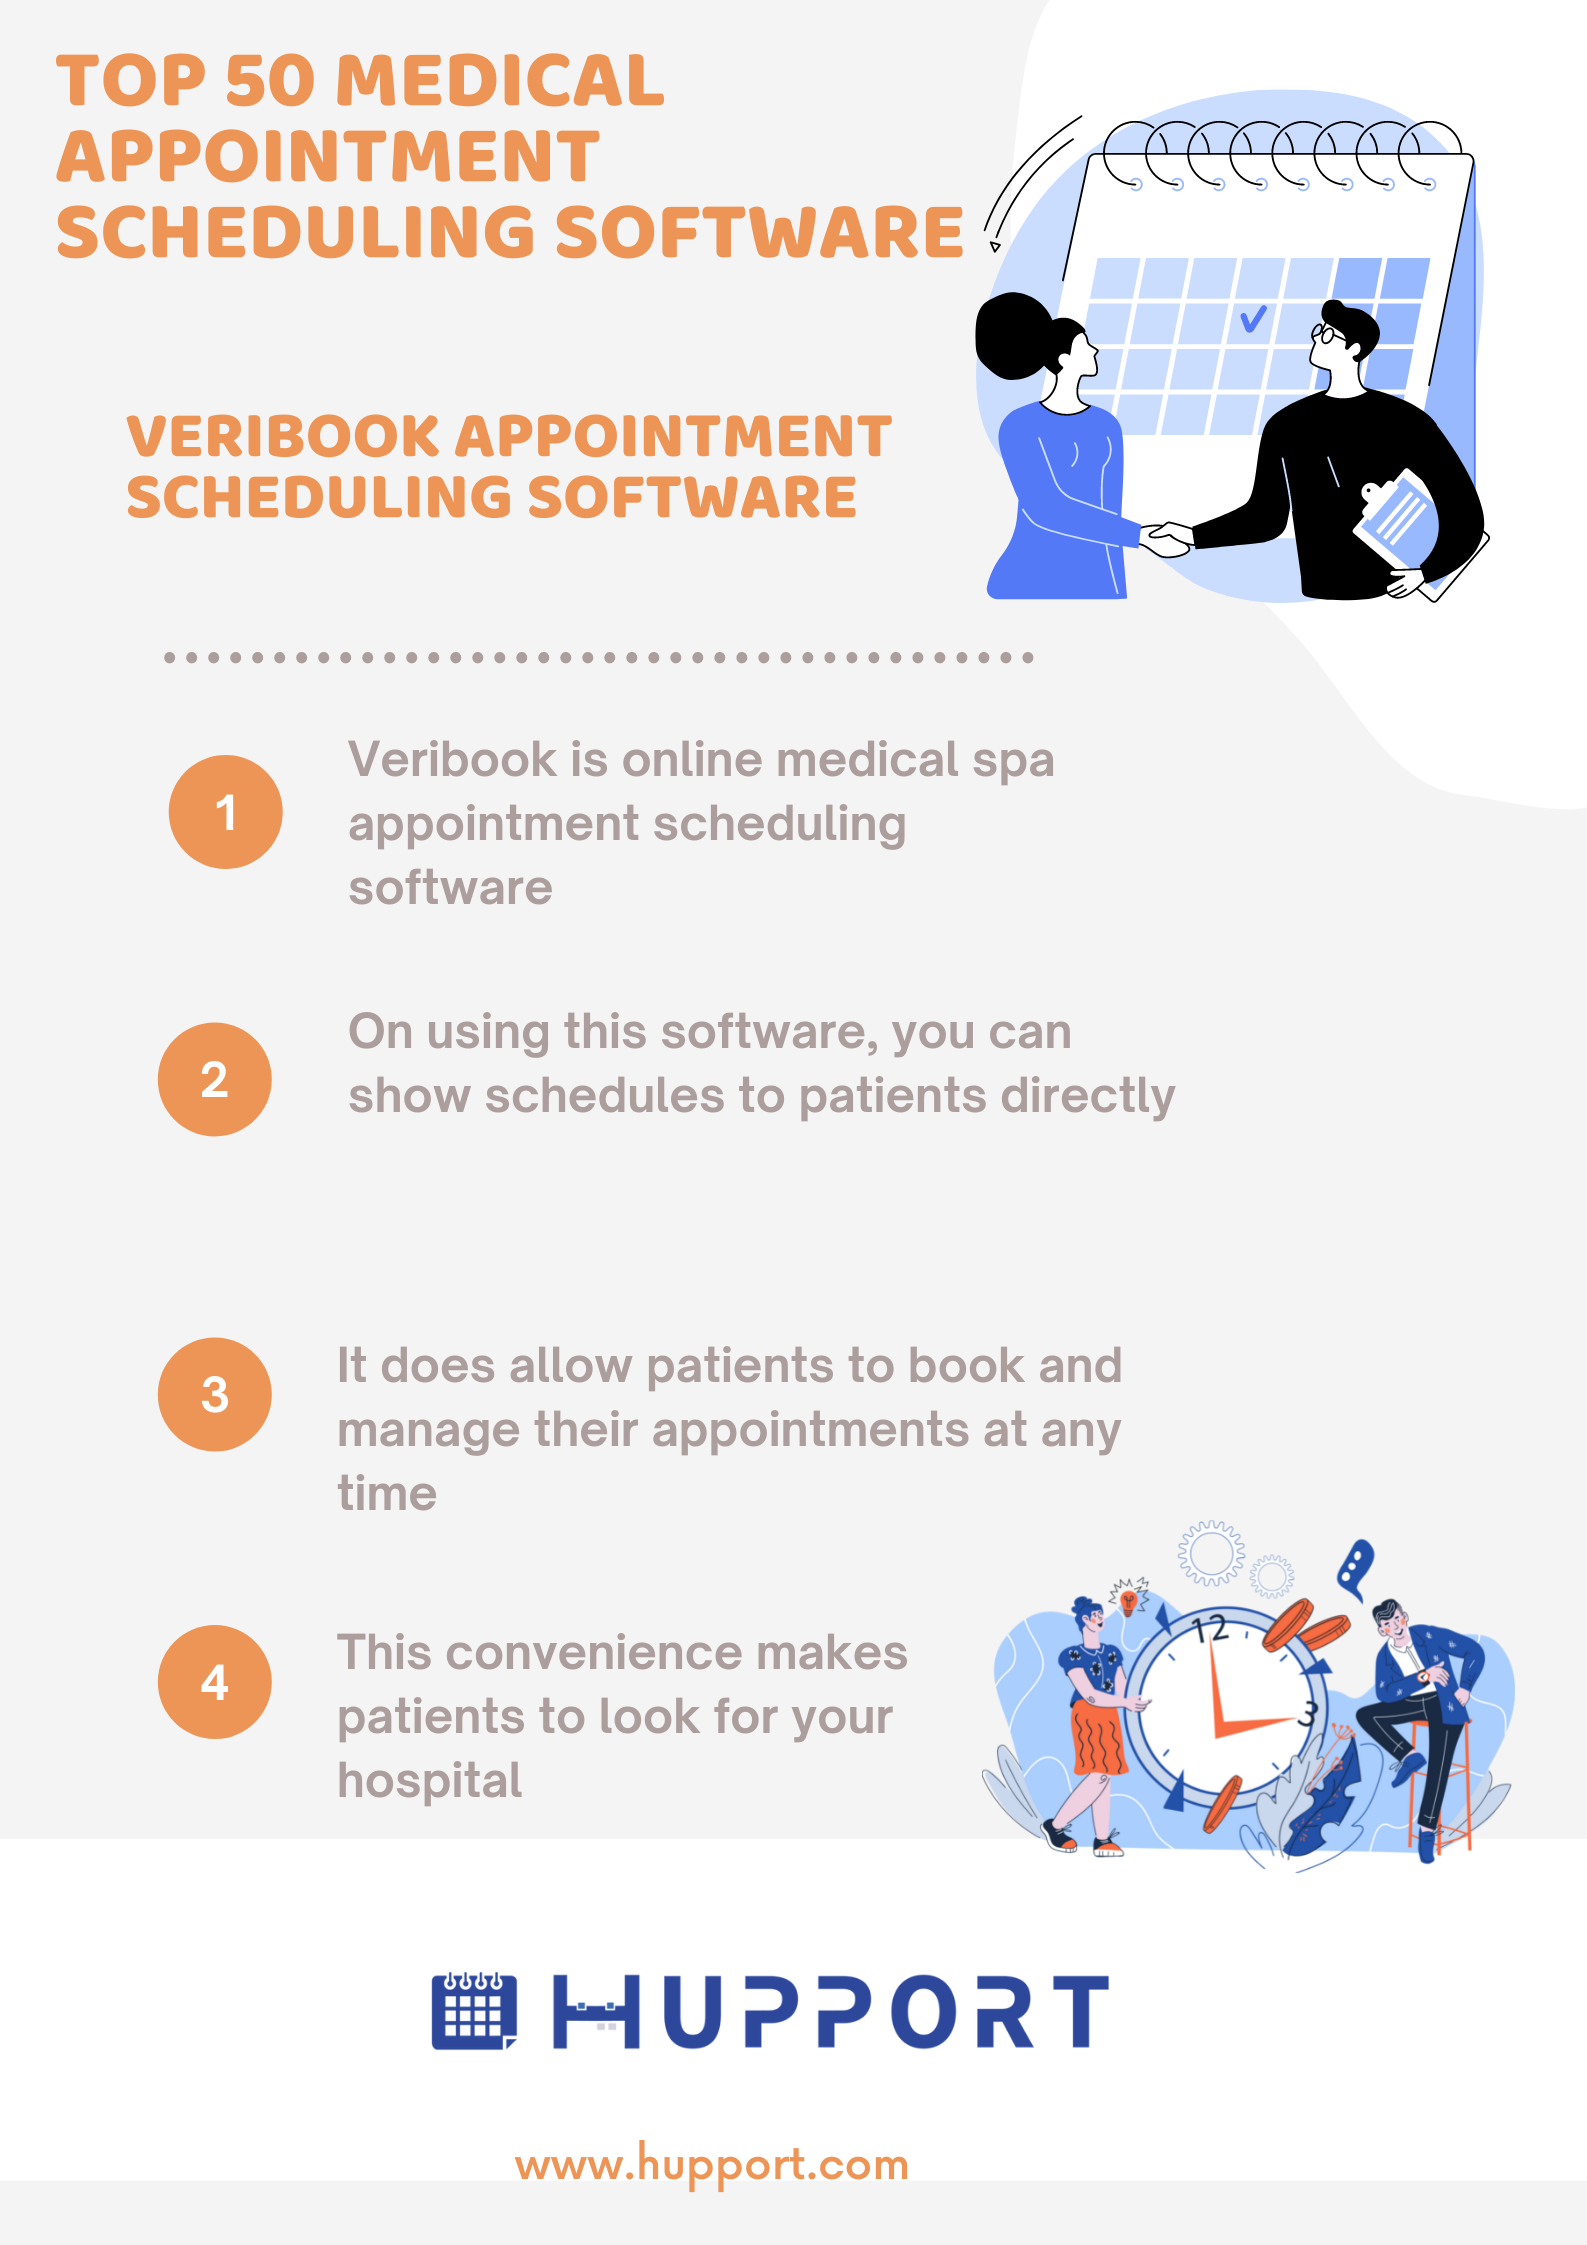 Veribook appointment scheduling software